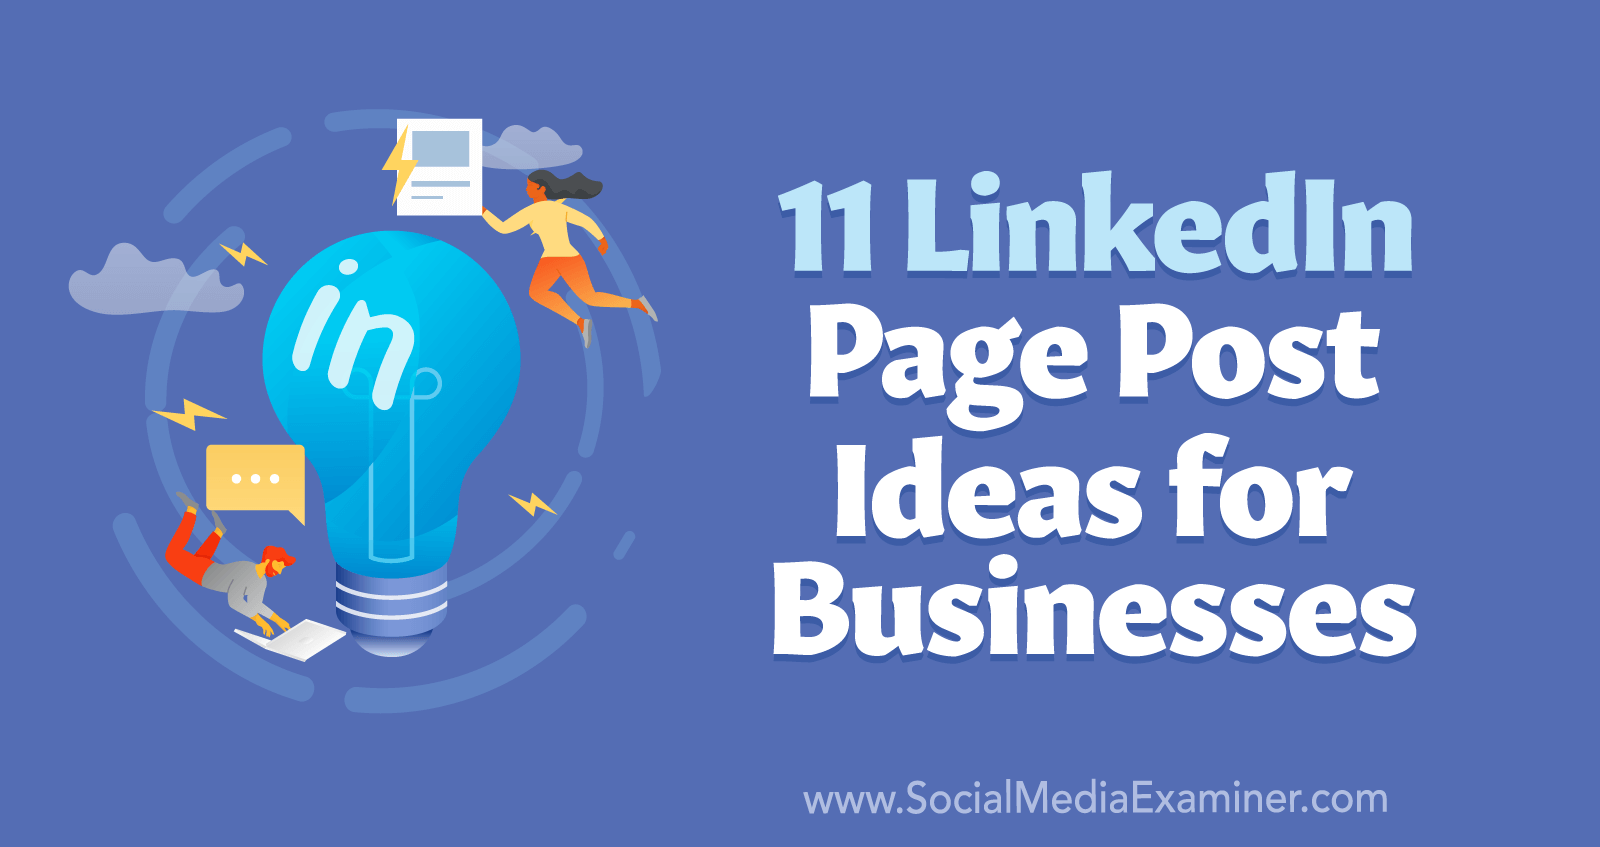 11 LinkedIn Page Post Ideas for Businesses by Anna Sonnenberg on Social Media Examiner.